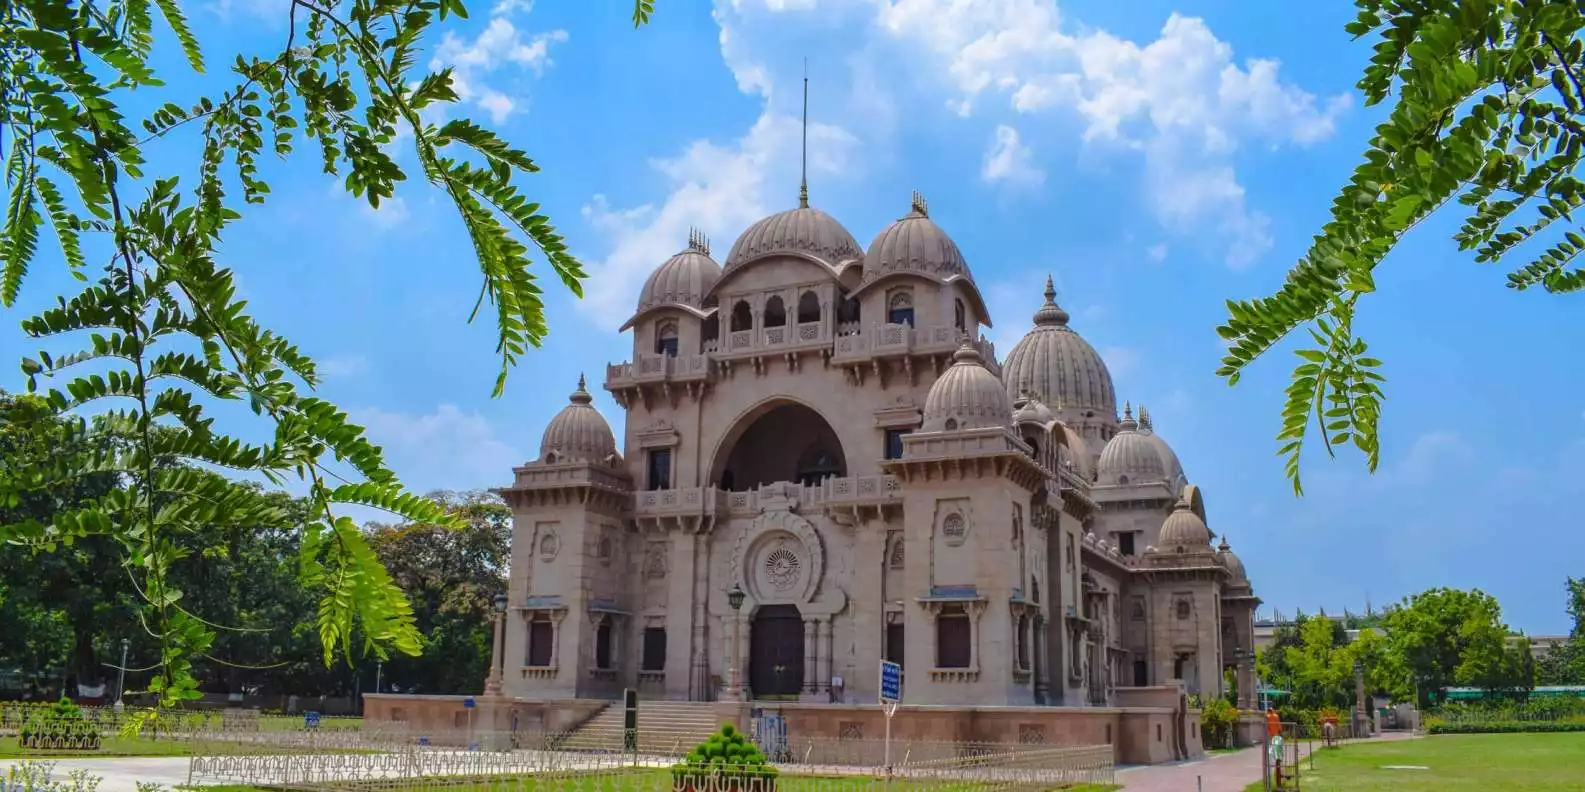 Kolkata: Private Full-Day Spirituality & Temples Tour | GetYourGuide